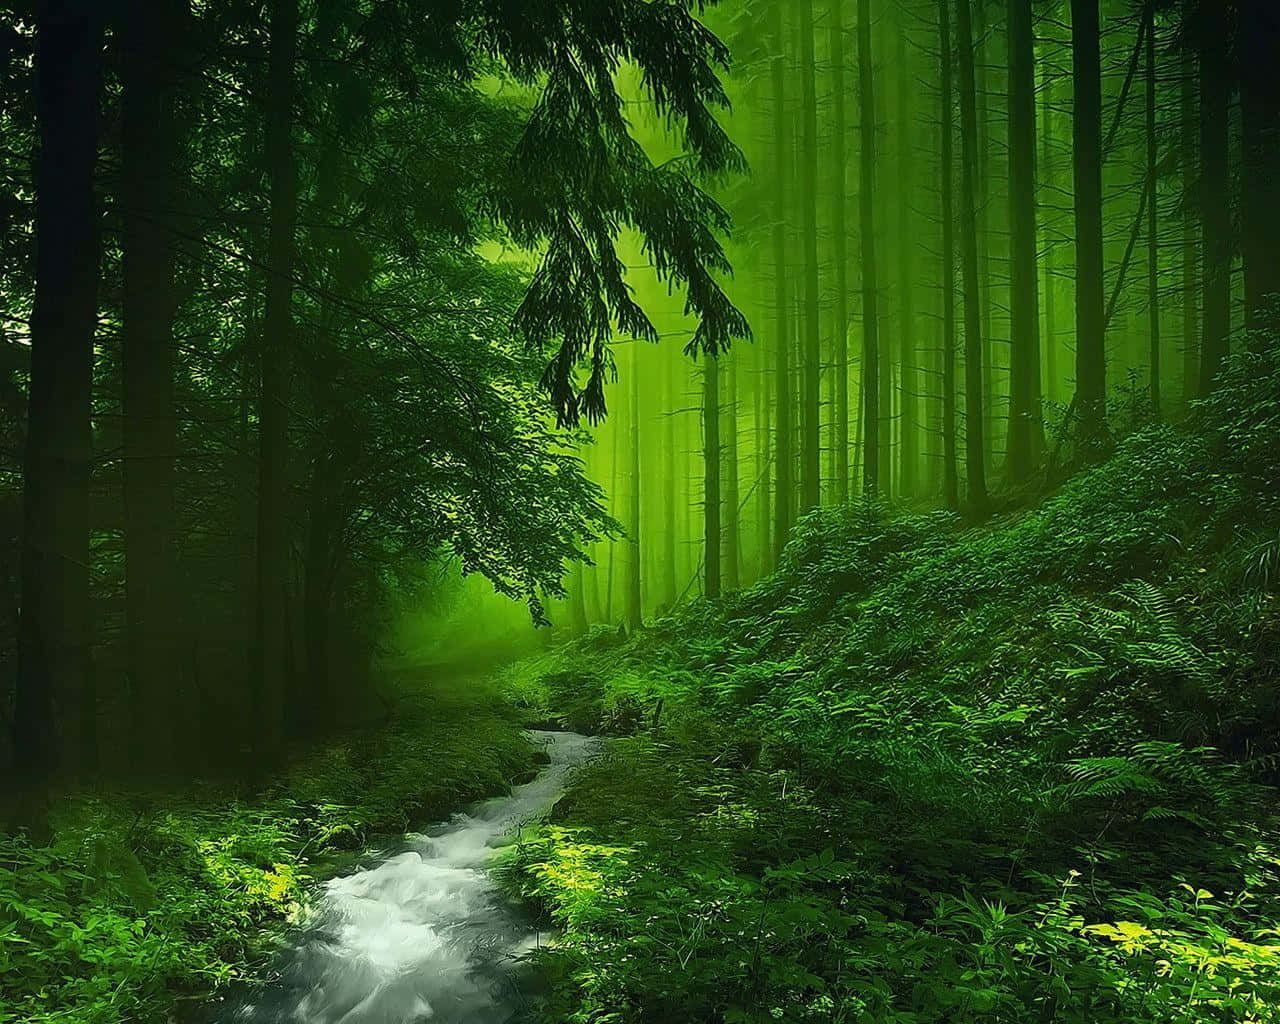 A Stream In The Forest With Green Trees